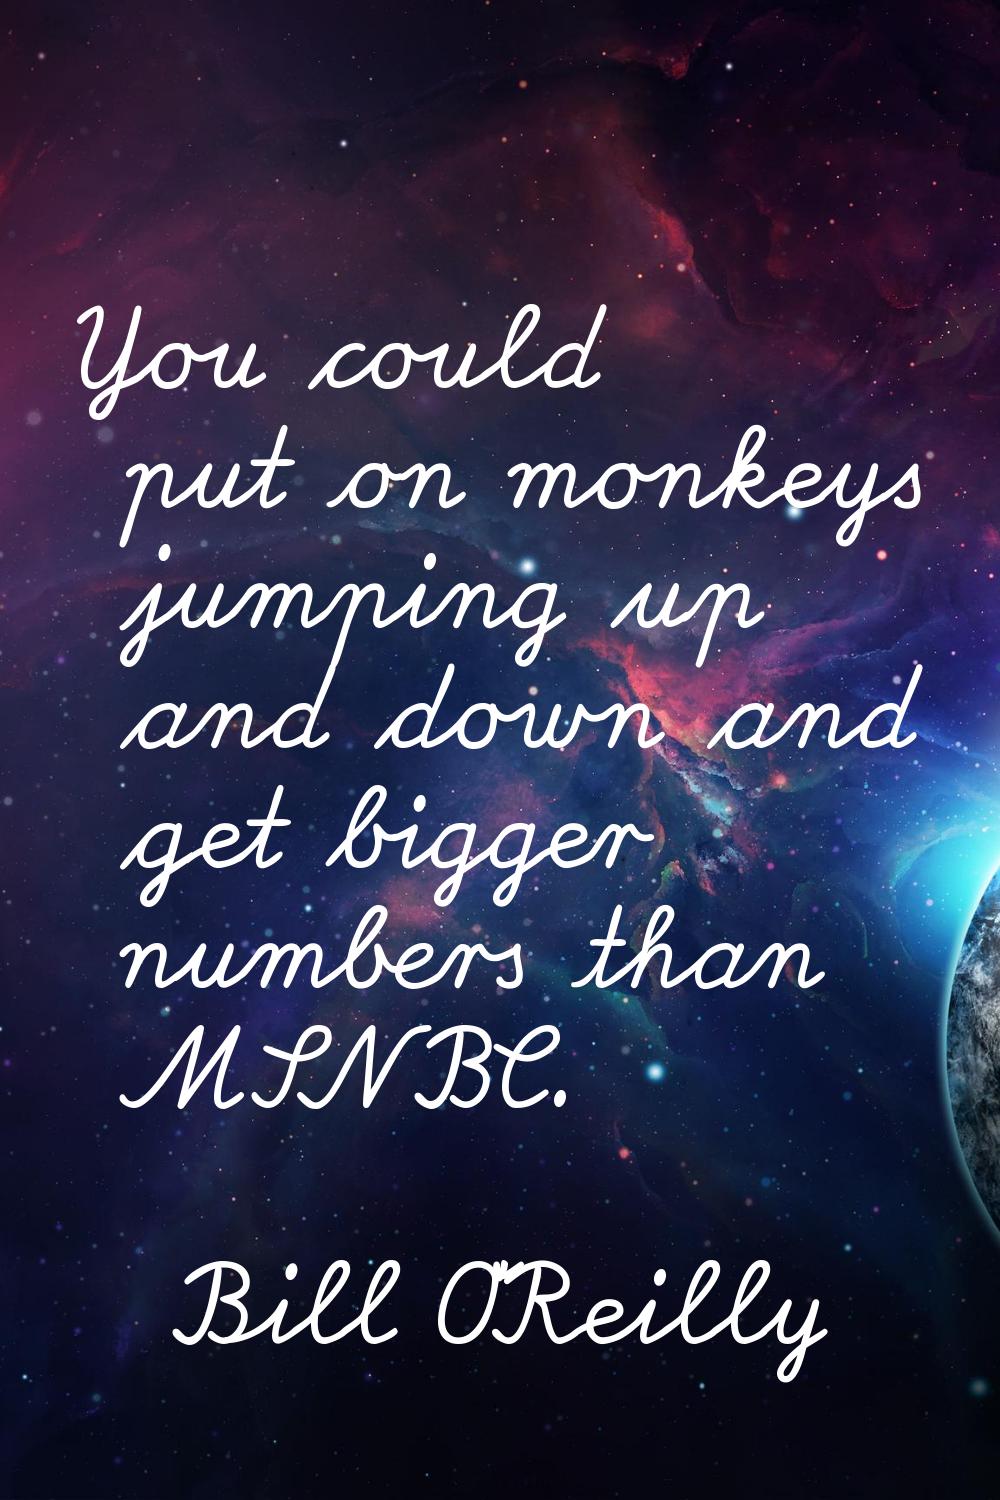 You could put on monkeys jumping up and down and get bigger numbers than MSNBC.